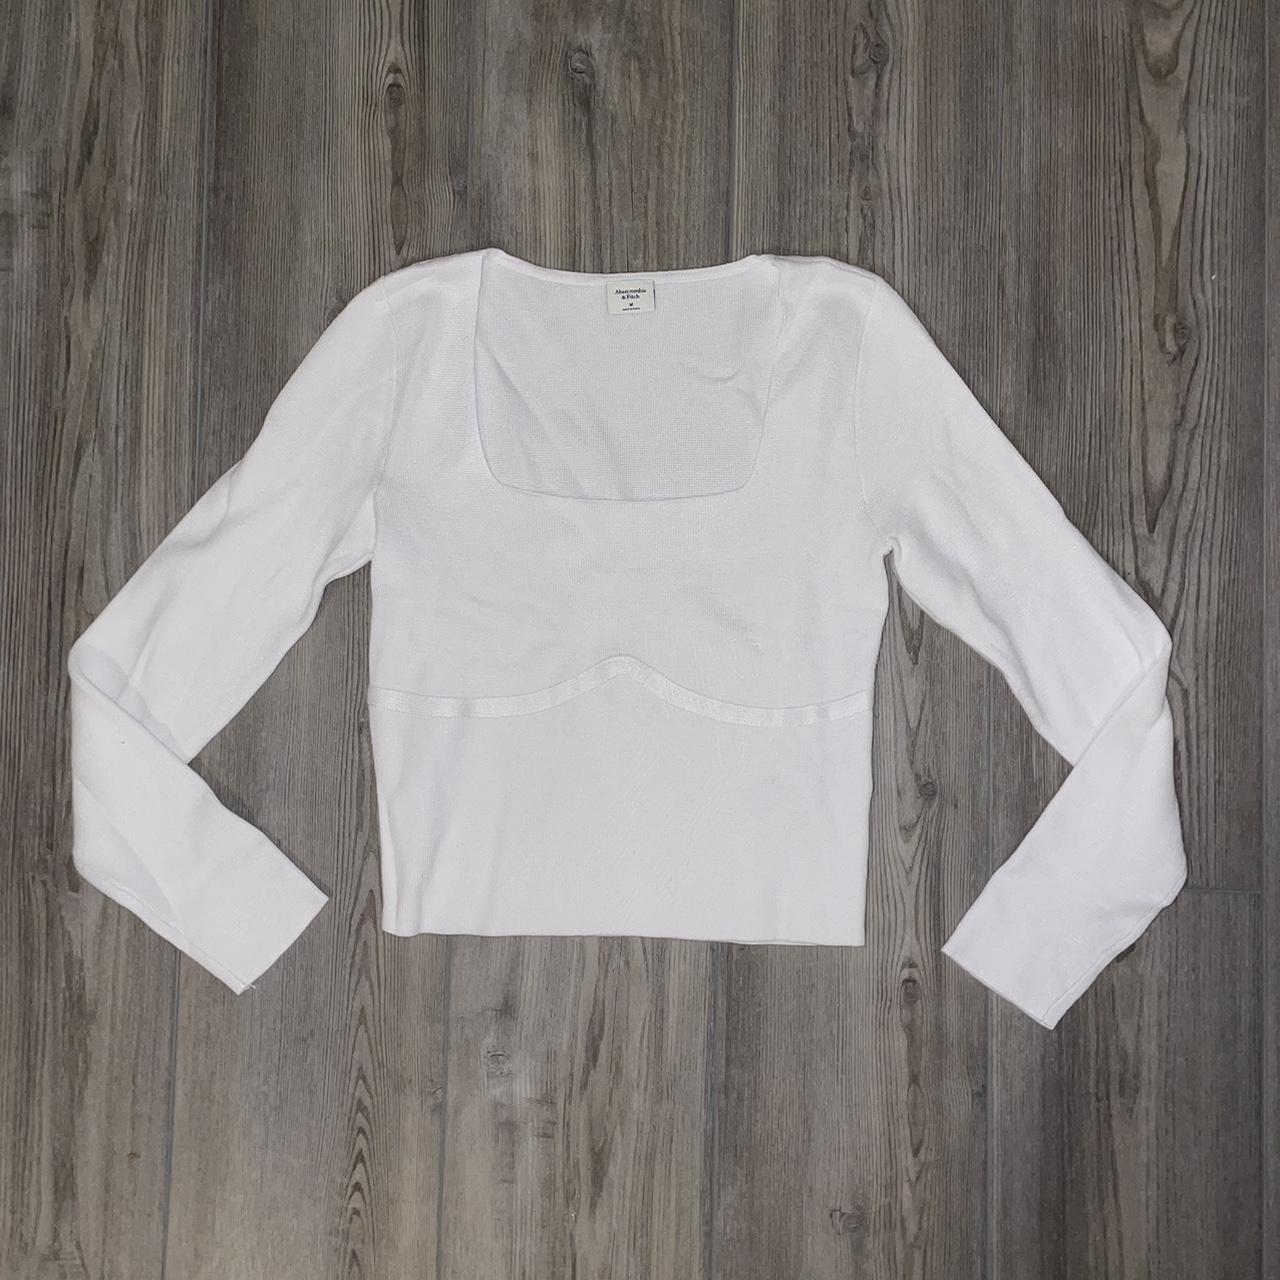 Abercrombie white knit square neck top with an... - Depop